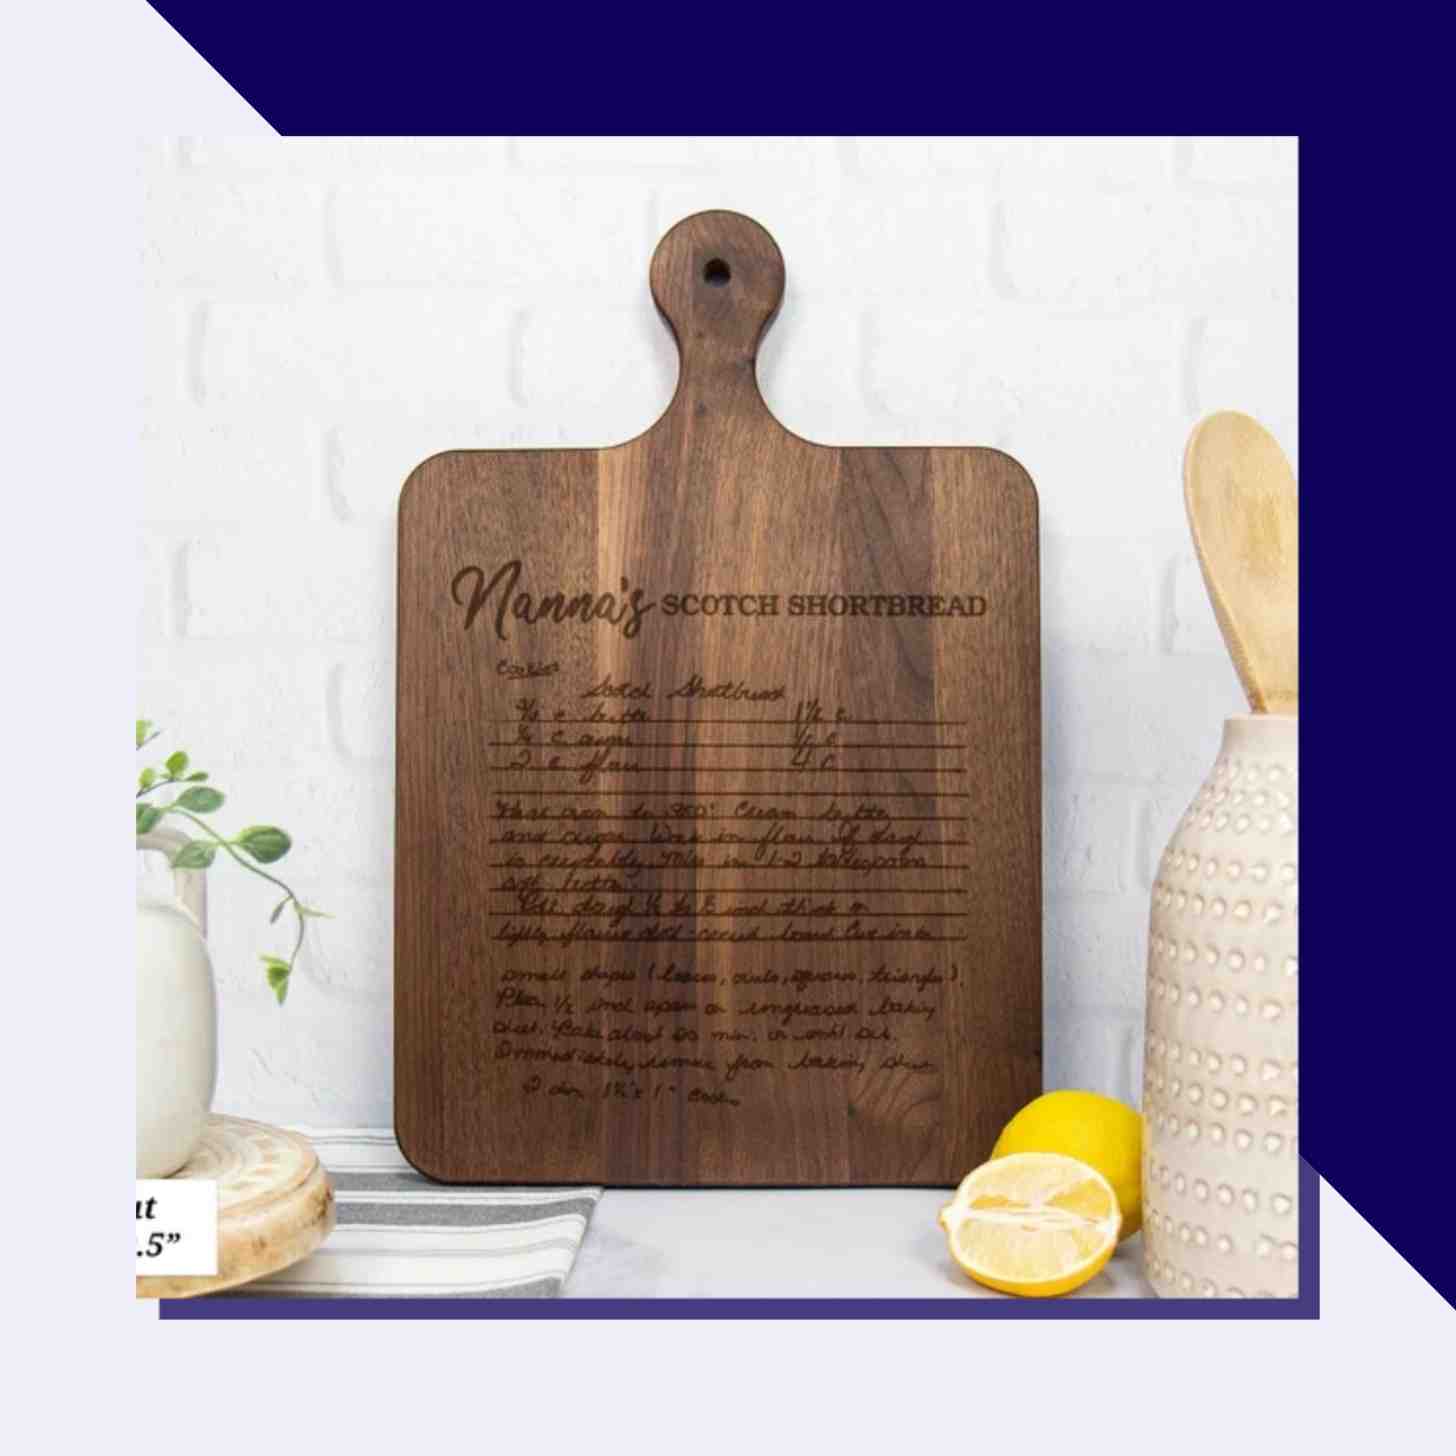 A Custom Wooden Cutting Board Inscribed With A Beloved Recipe